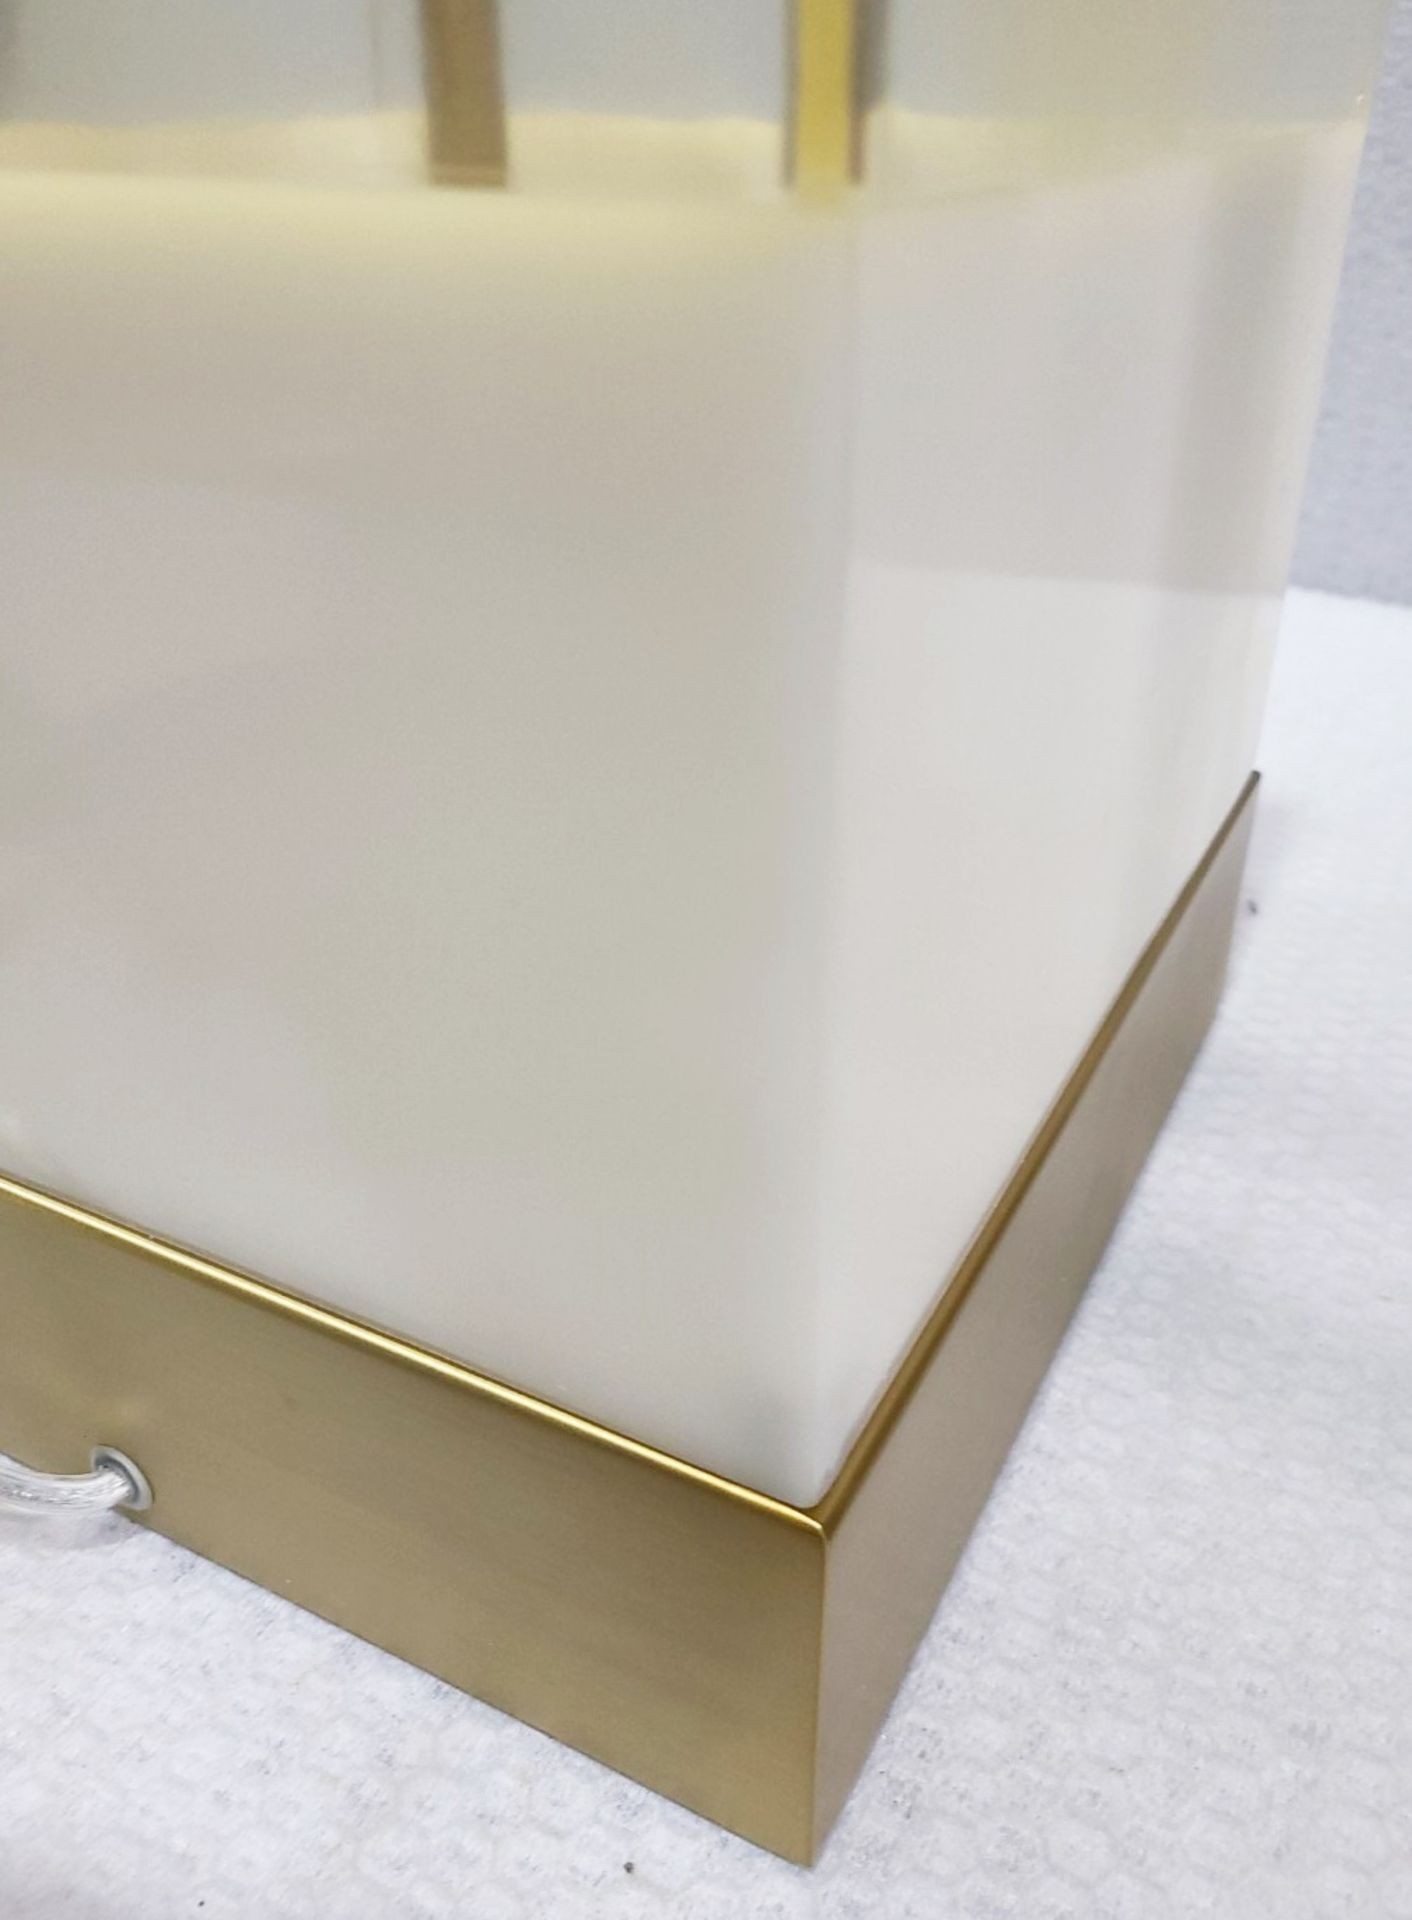 1 x CHELSOM Rectangular Gold Tinted Glass Box Table Lamp With Stone Lower Third And Brass Base - Image 3 of 10